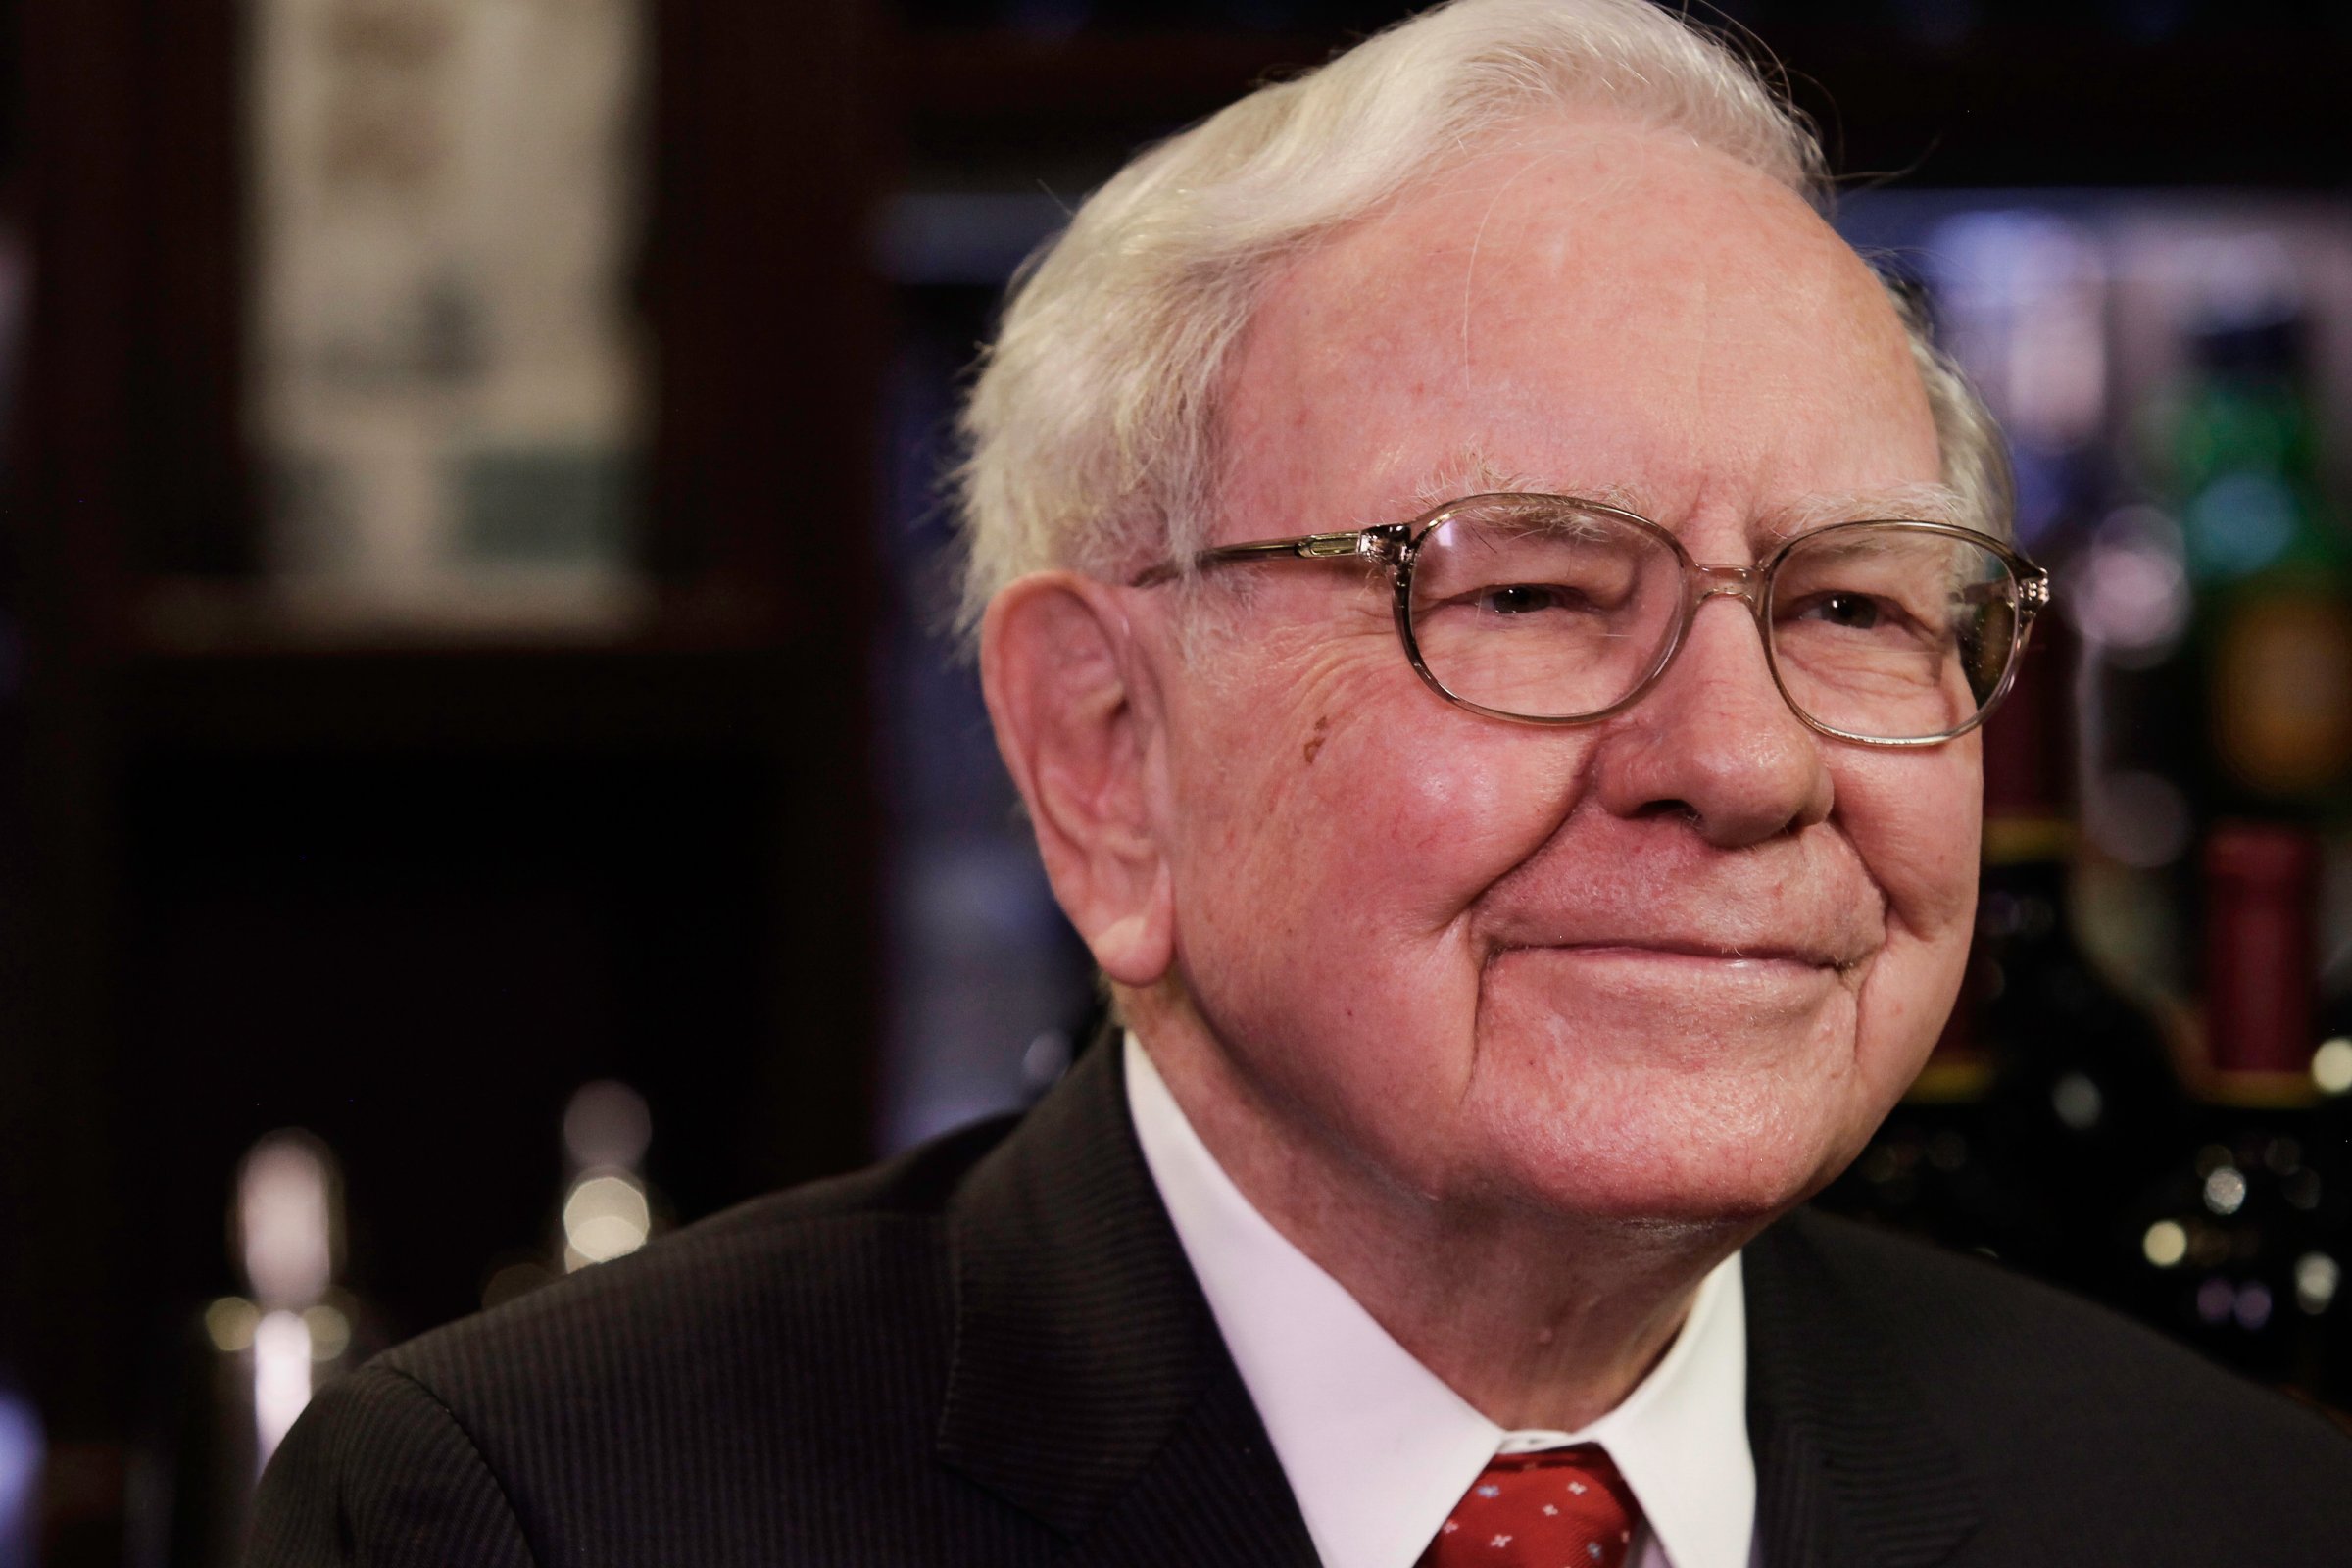 Warren Buffett, chairman and chief executive officer of Berkshire Hathaway Inc., during an interview in New York City on Sept. 8, 2015.